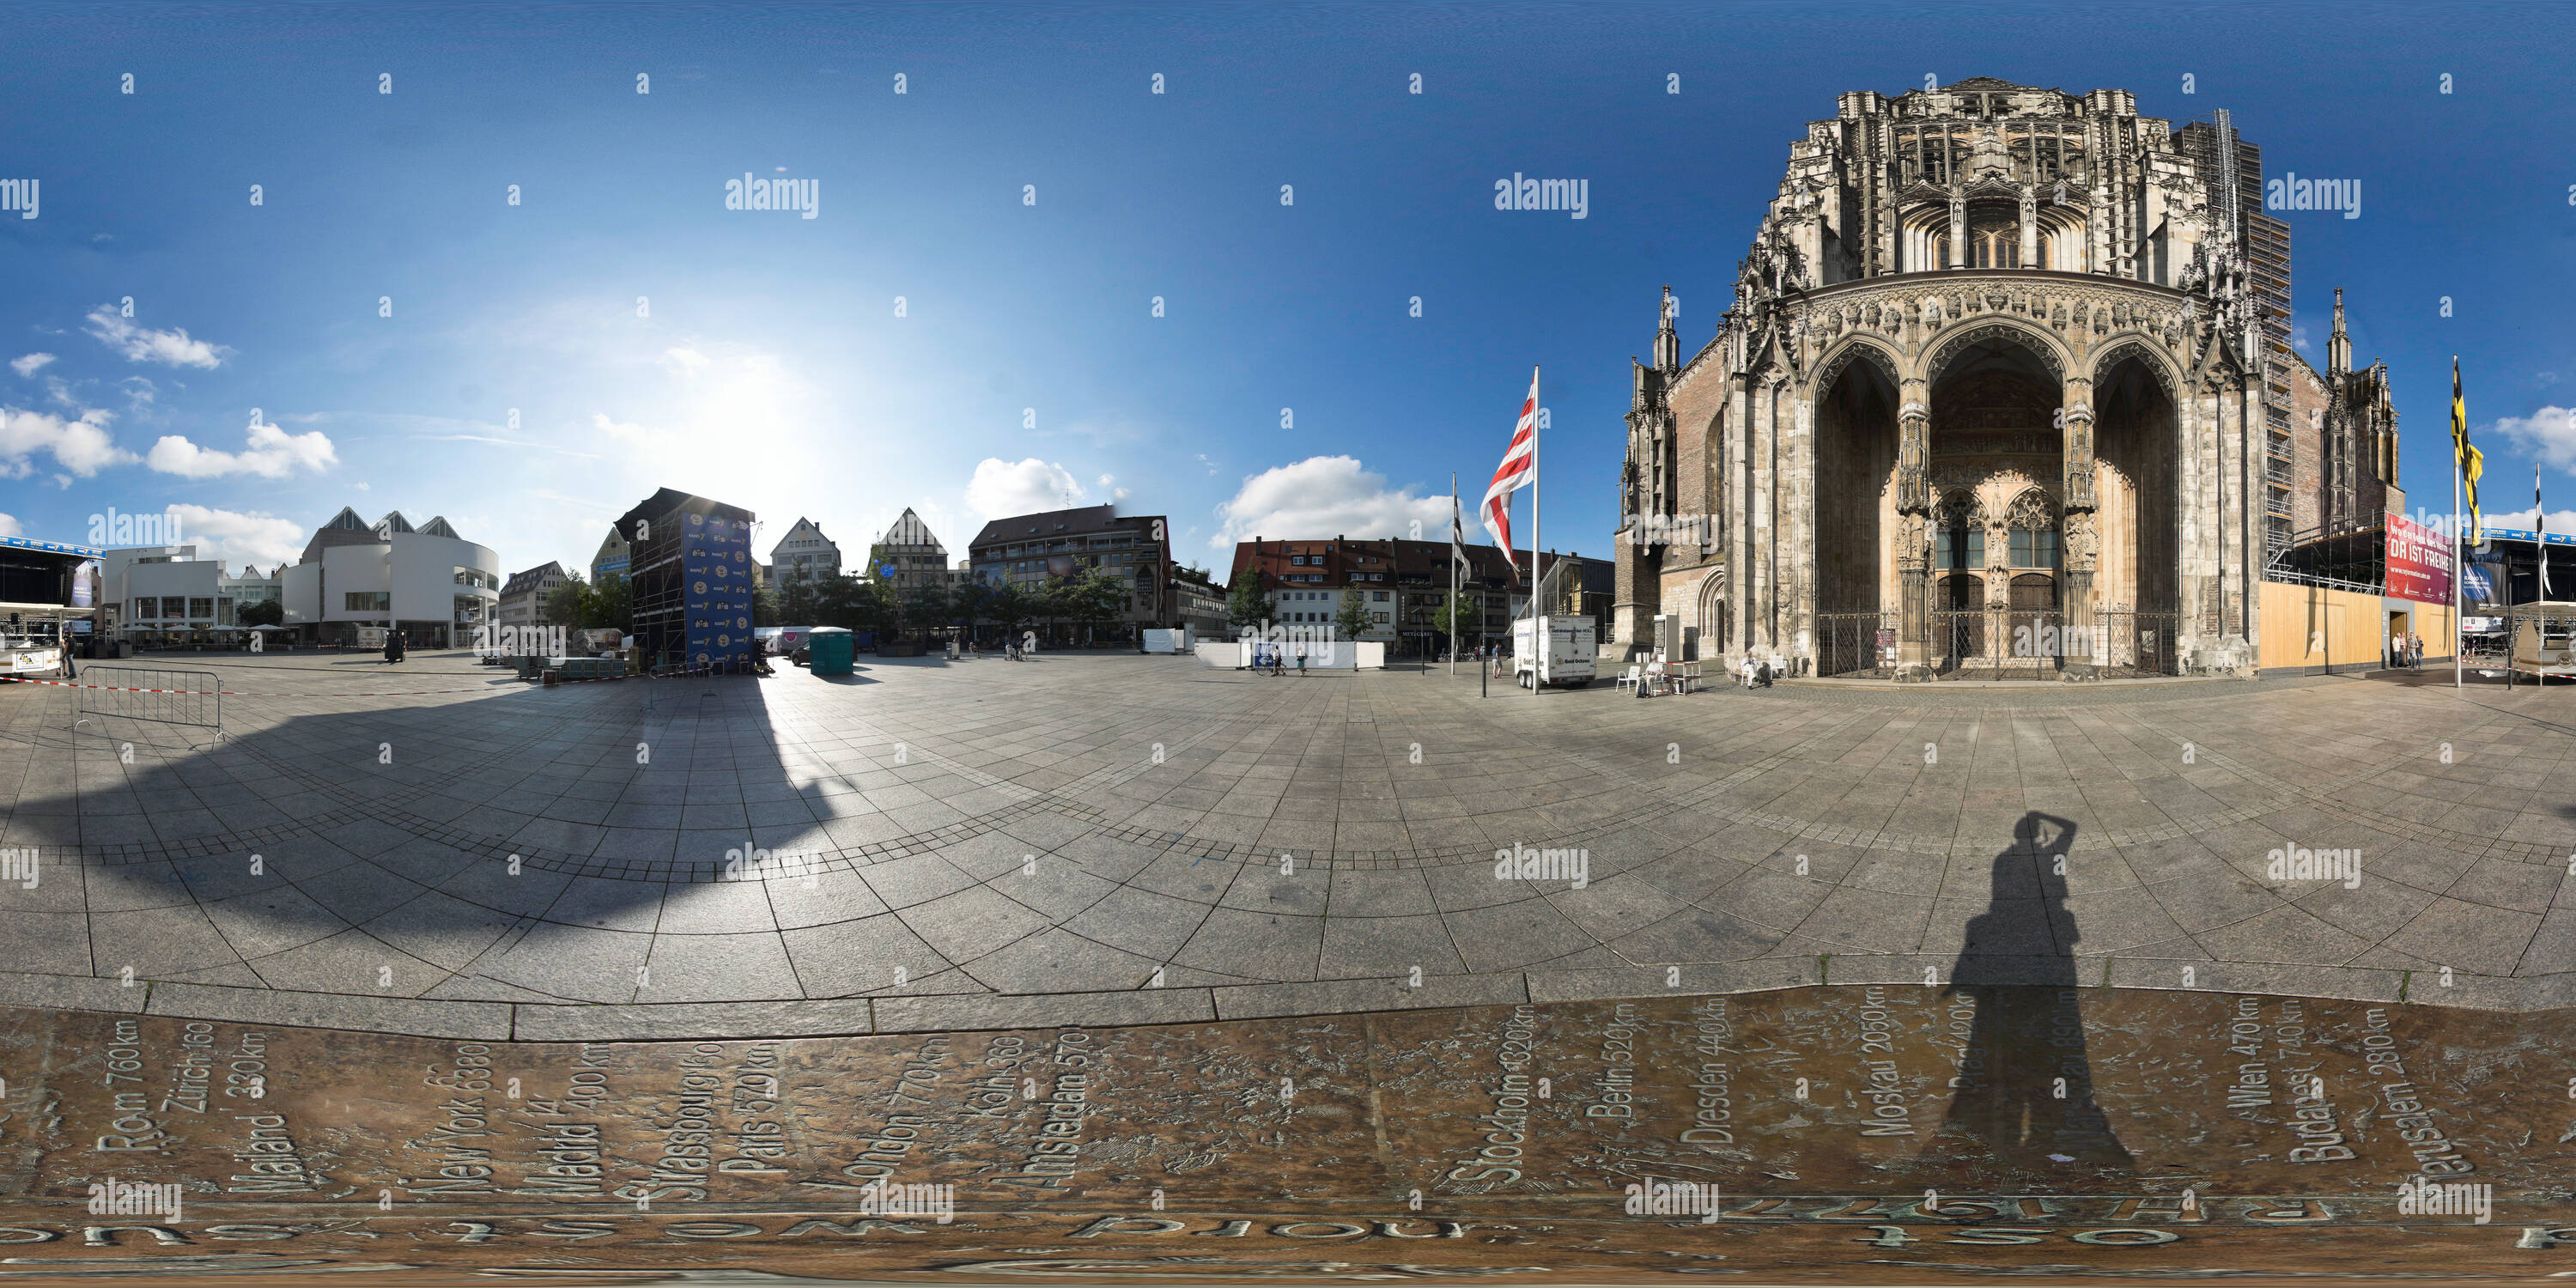 360 degree panoramic view of Ulm Minster, Distance Plaque, Ulm 2017-07